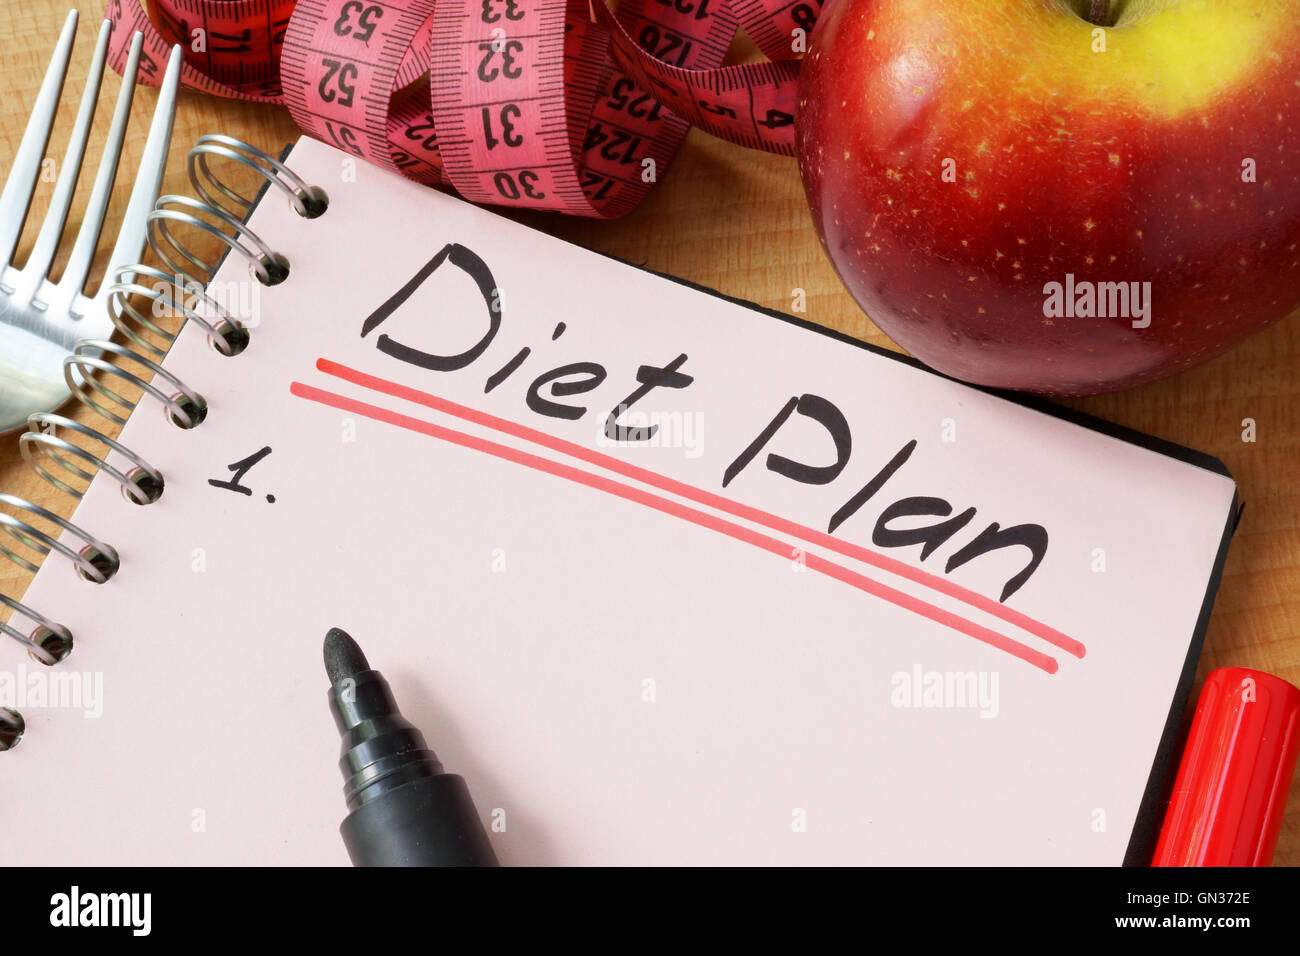 Diary with a record diet plan on a table. Stock Photo